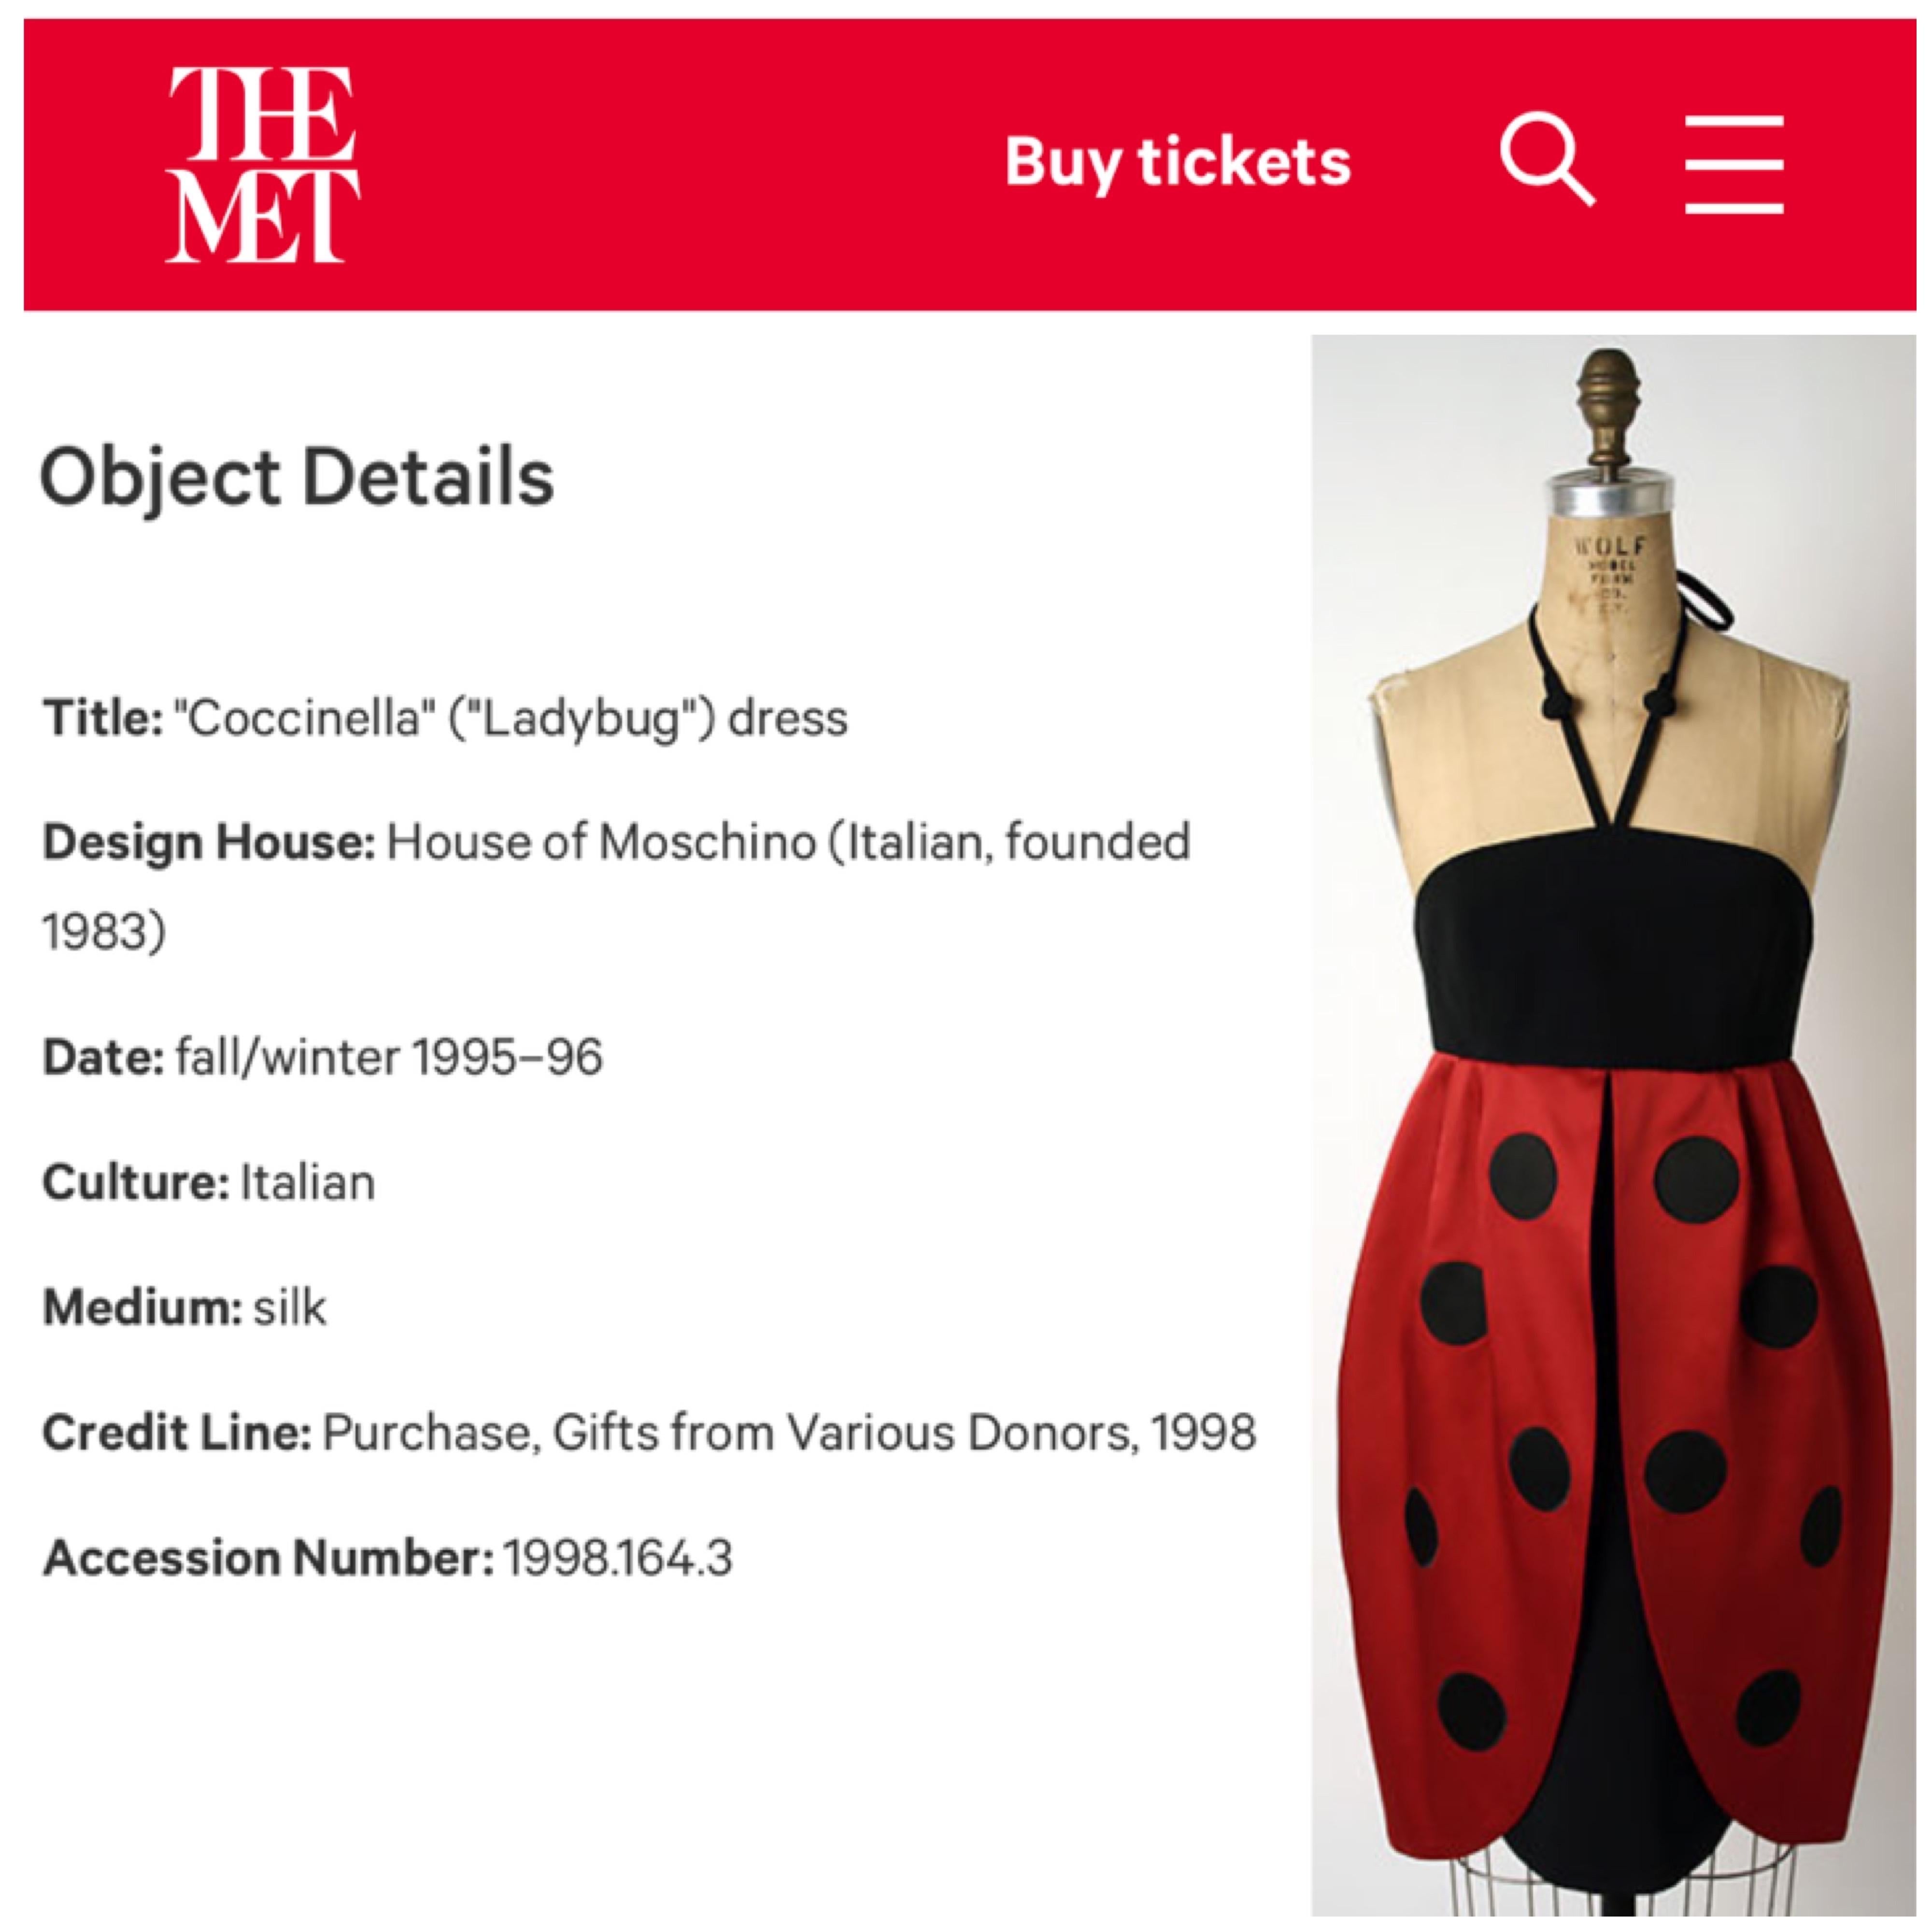 Sensational Moschino Couture 'Coccinella' titled ladybug novelty silk dress dating back to his 1995 fall-winter collection. As shown, this ultra rare and absolutely adorable garment is also archived at The Metropolitan Museum of Art! Moschino called